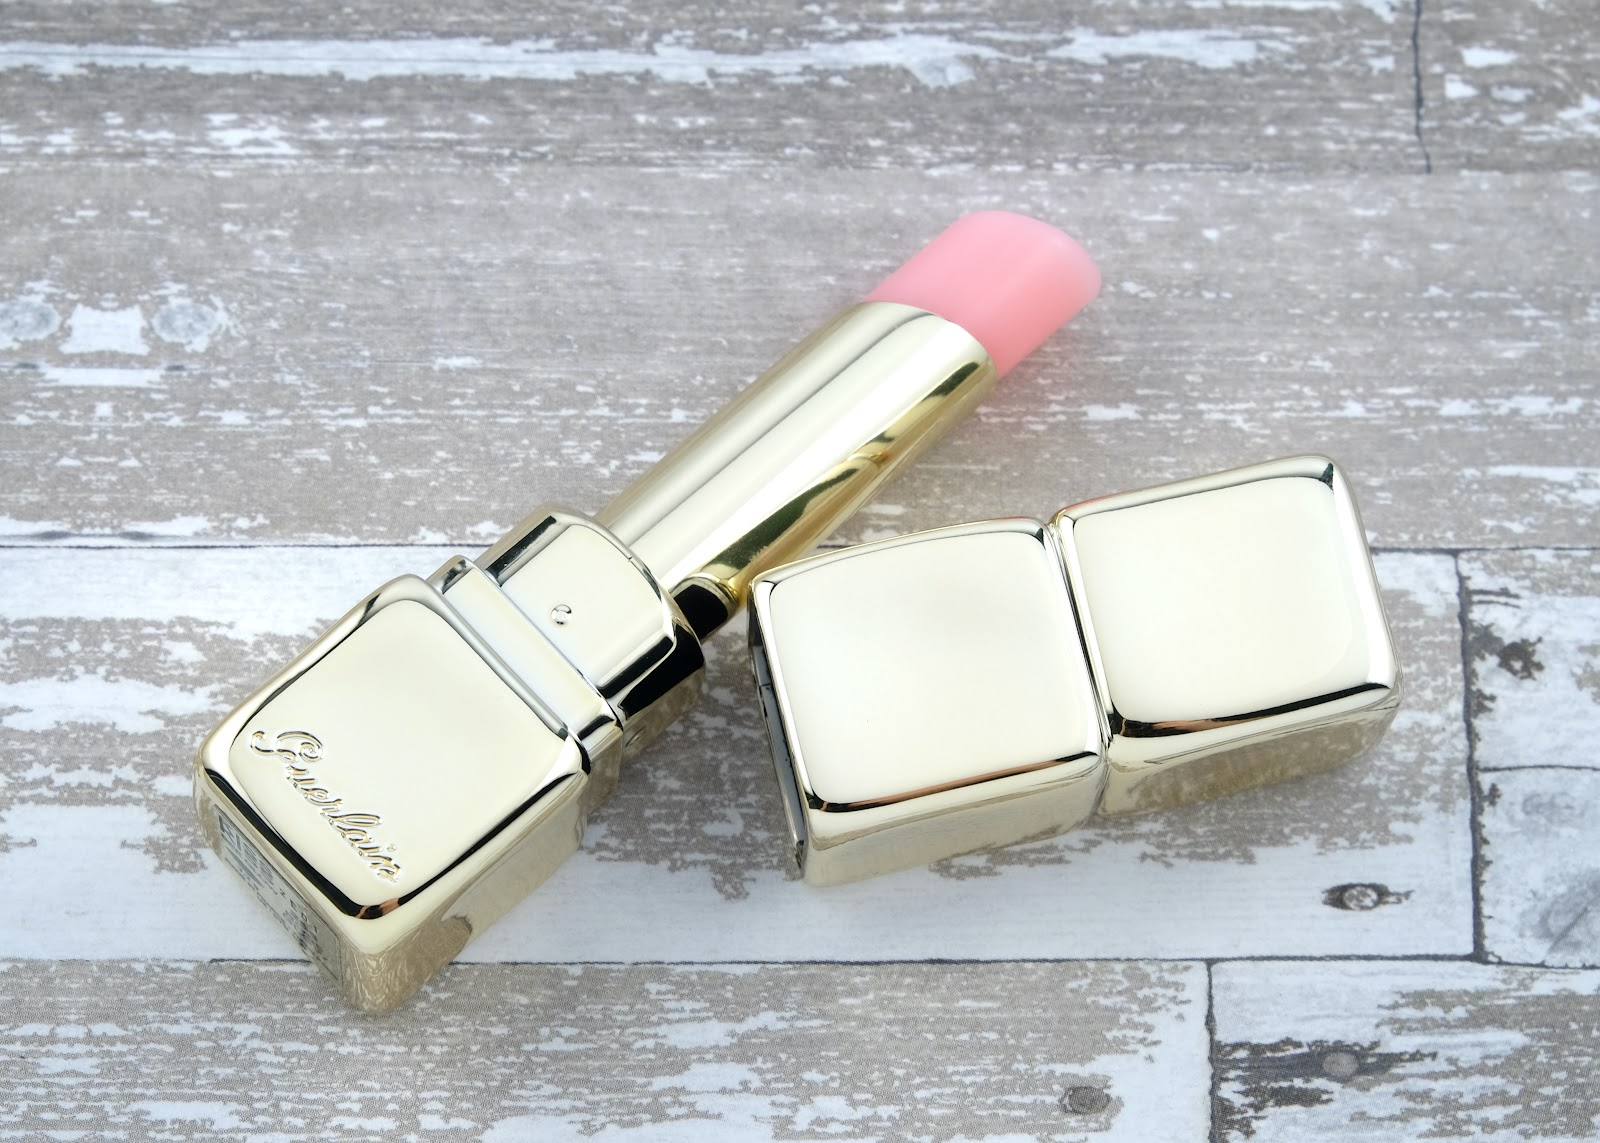 Guerlain | KissKiss Bee Glow Lipstick Balm: Review and Swatches